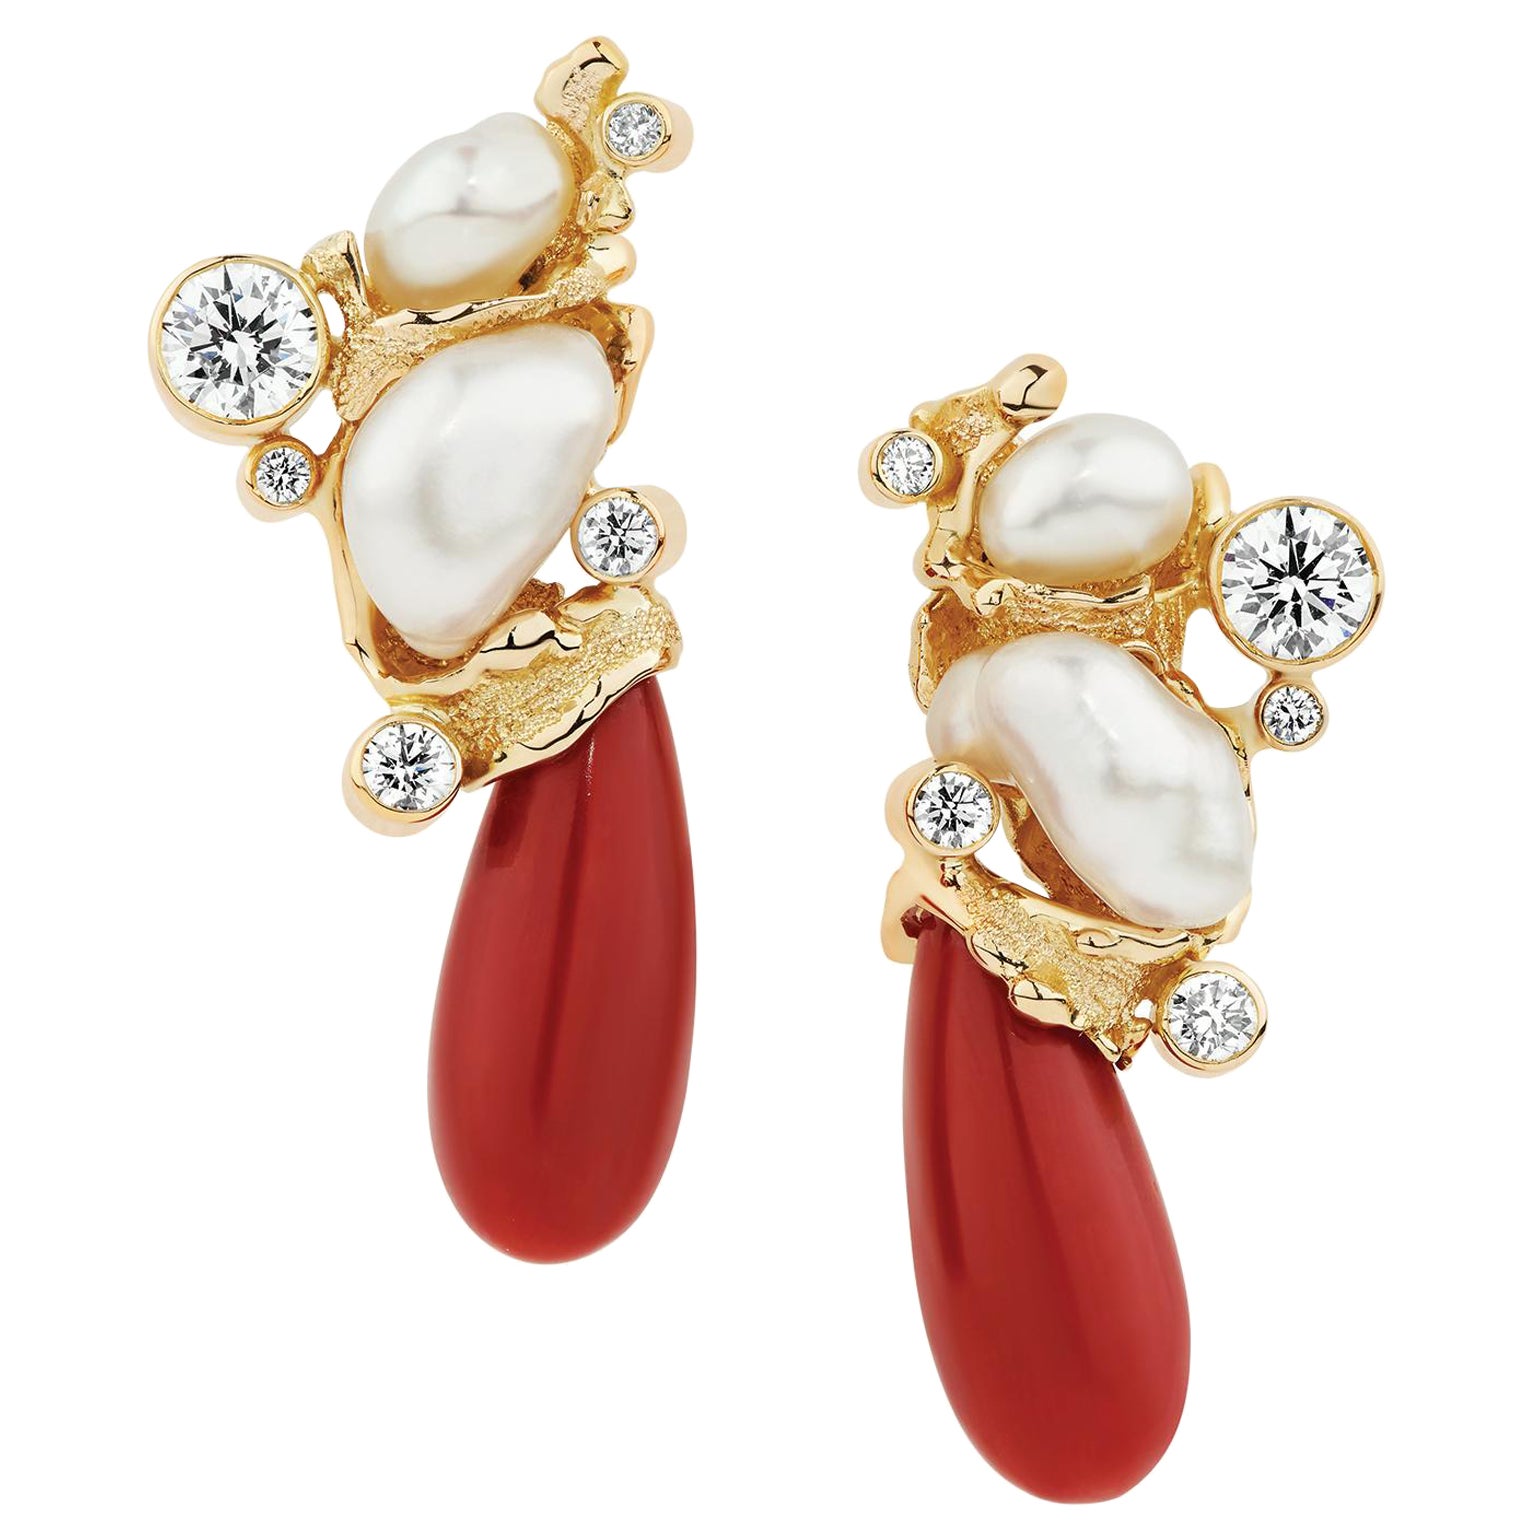 Paul Amey Handcrafted 18K, Diamonds and Natural Red Coral "Georgia" Earrings For Sale